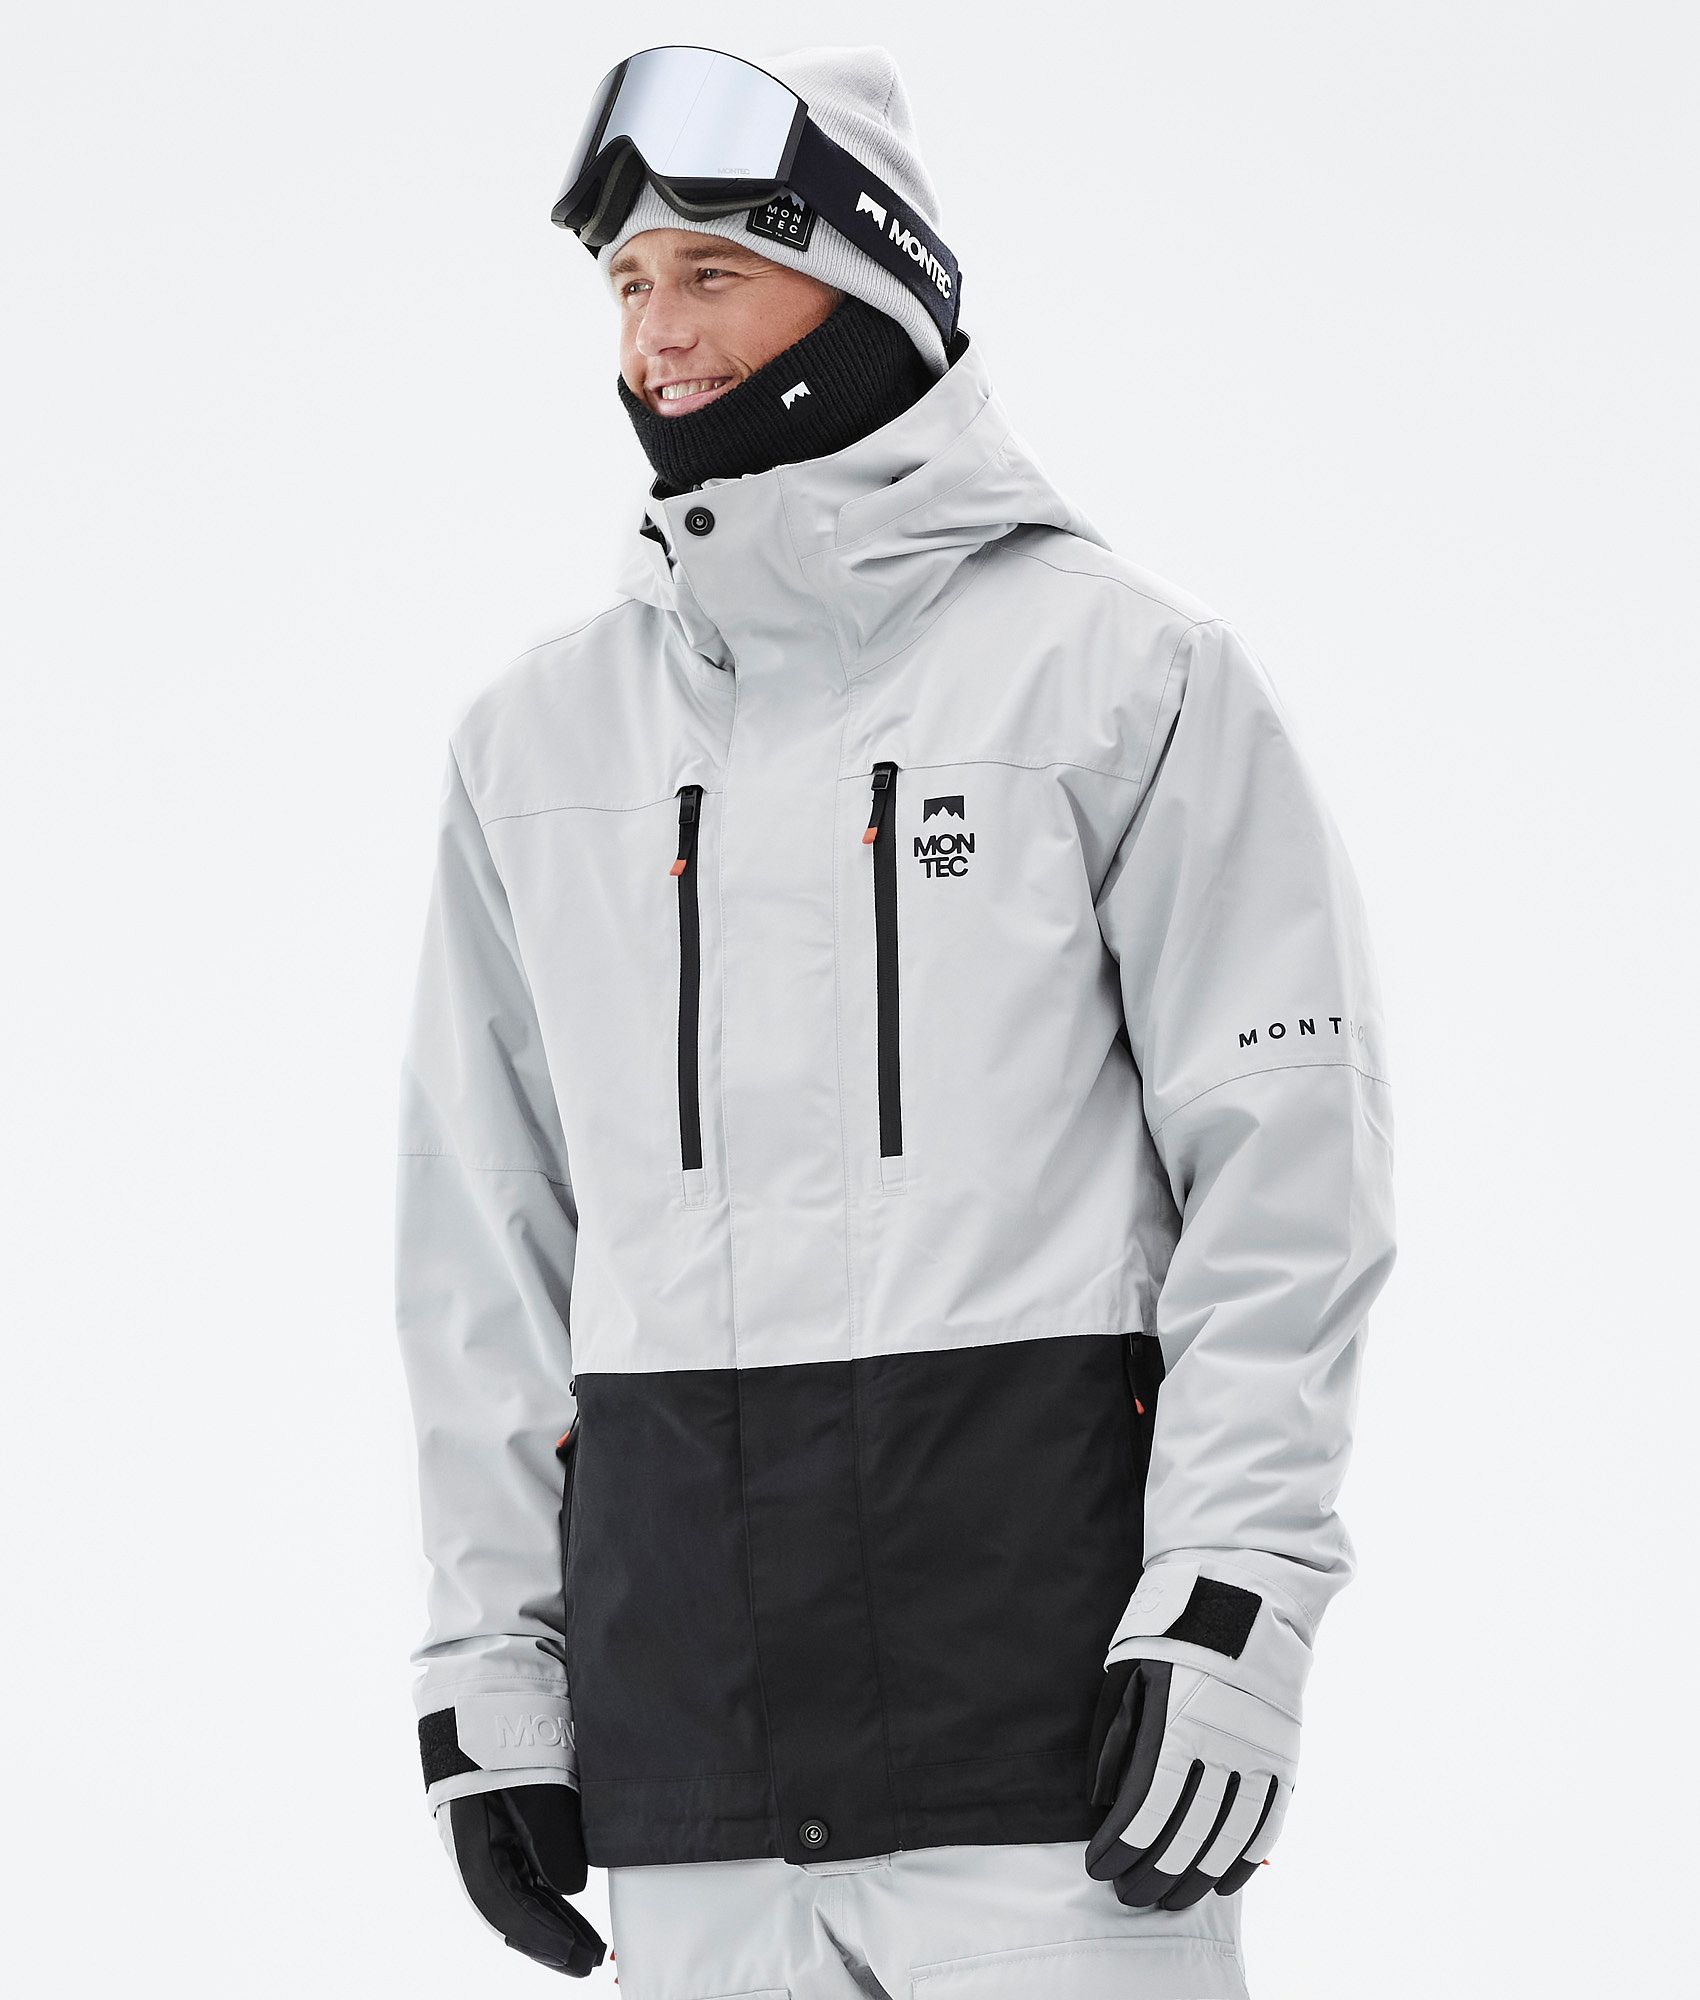 Aggregate more than 82 mens ski jackets and pants latest - in.eteachers